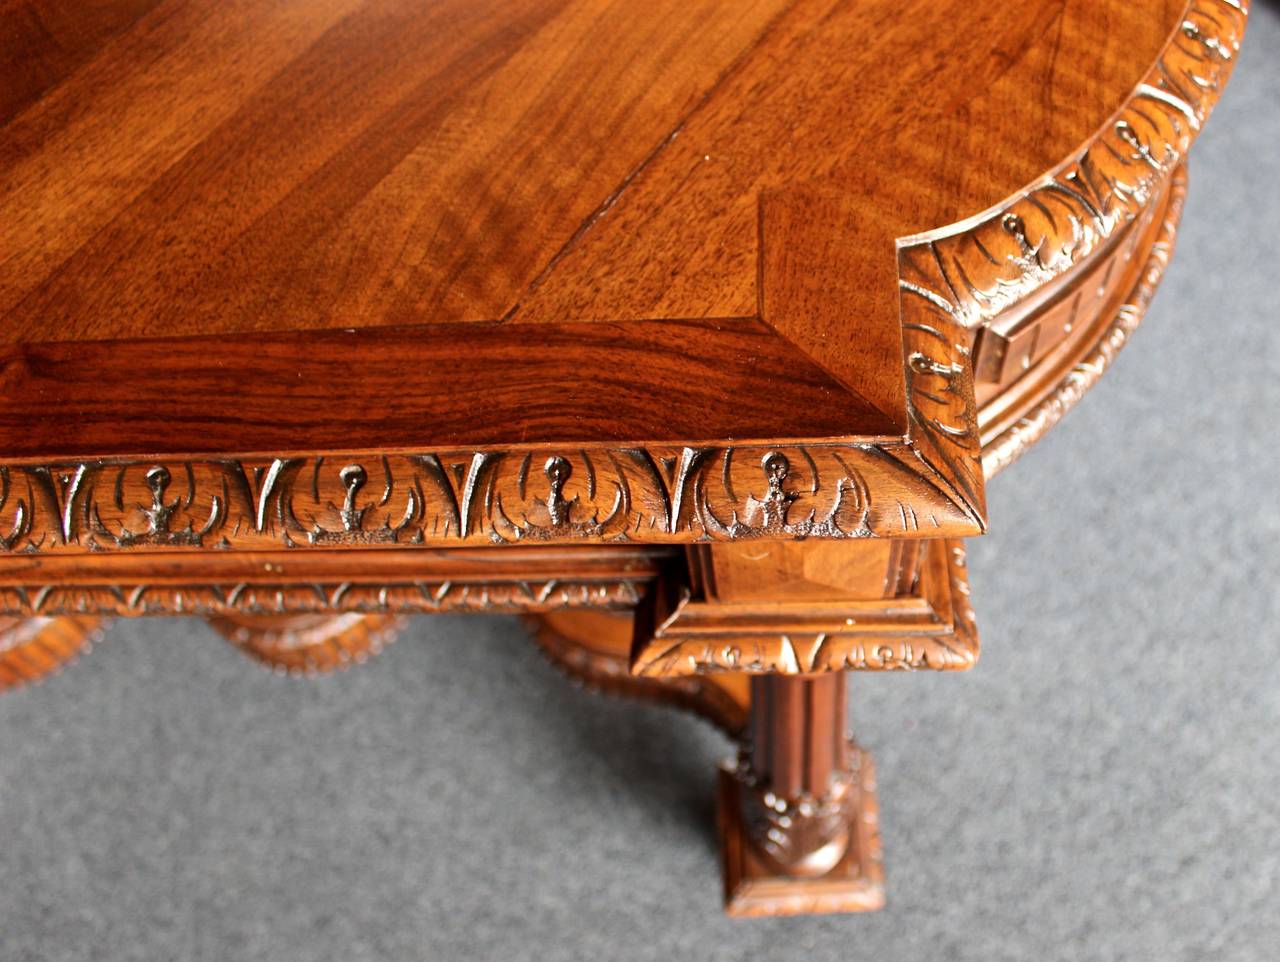 Yew Early 20th Century French Decorative Table For Sale